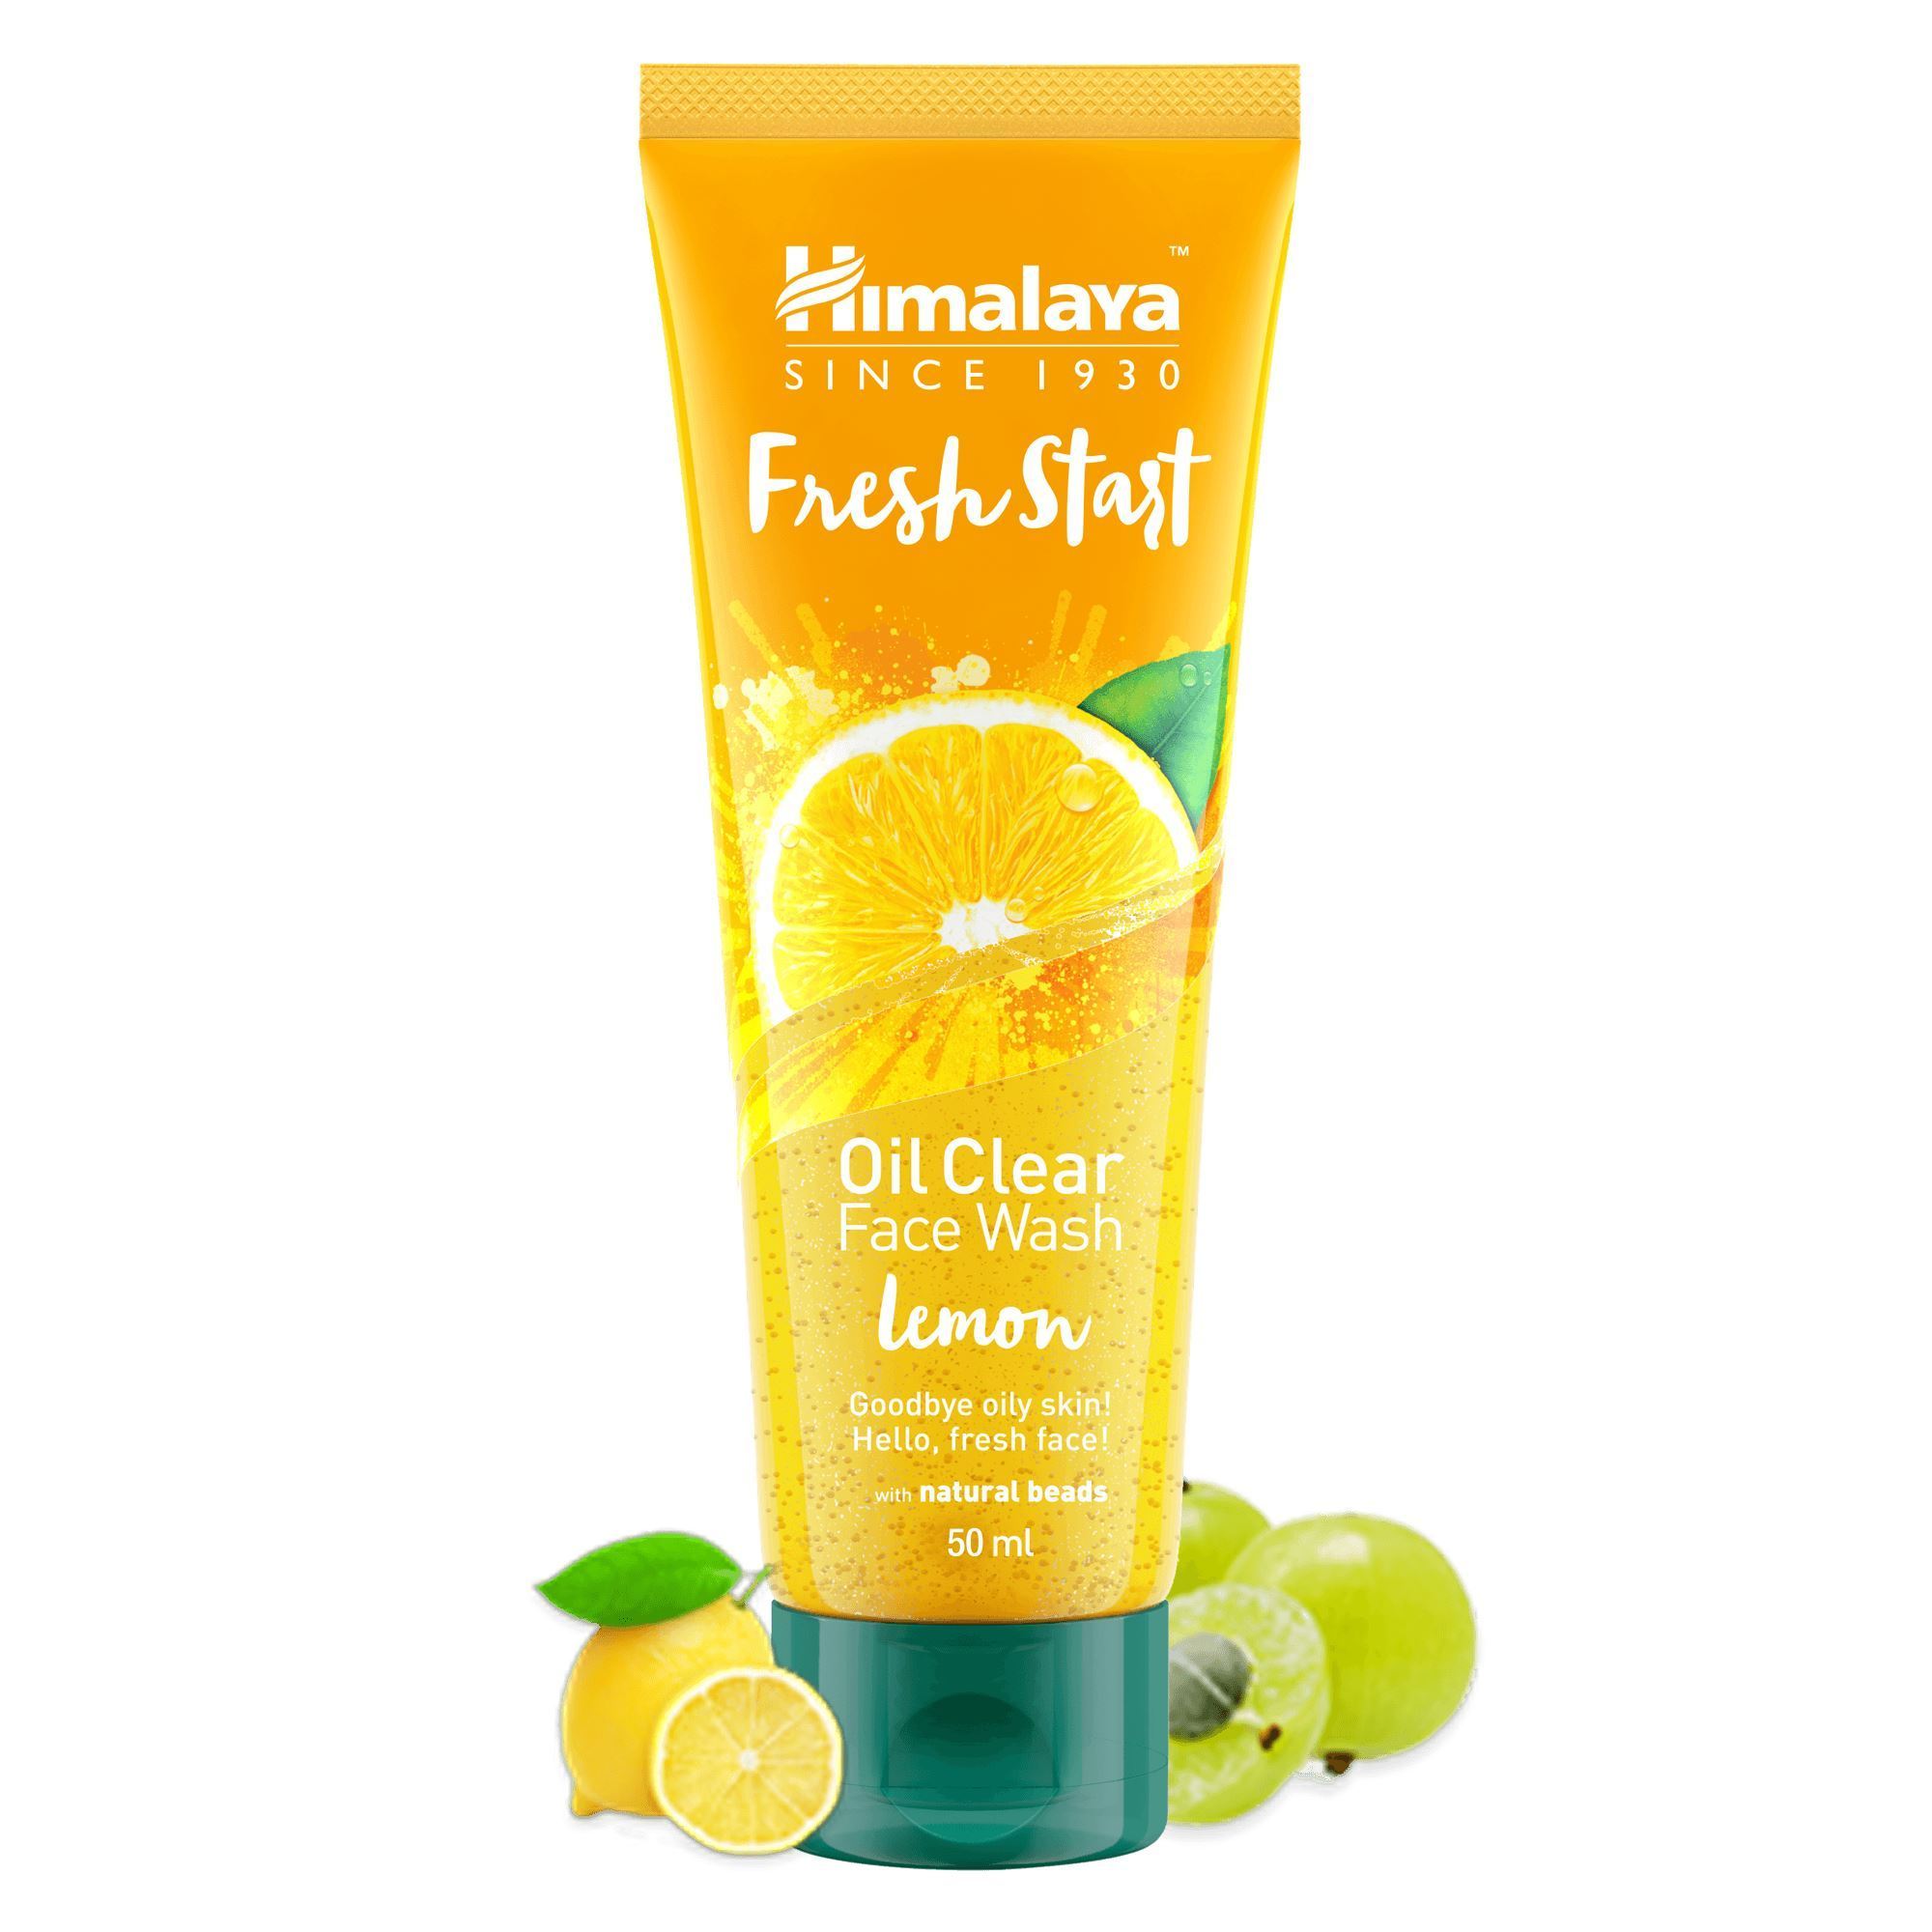 Himalaya Fresh Start Oil Clear Lemon Face Wash 50ml - Helps remove excess oil, dirt, and impurities